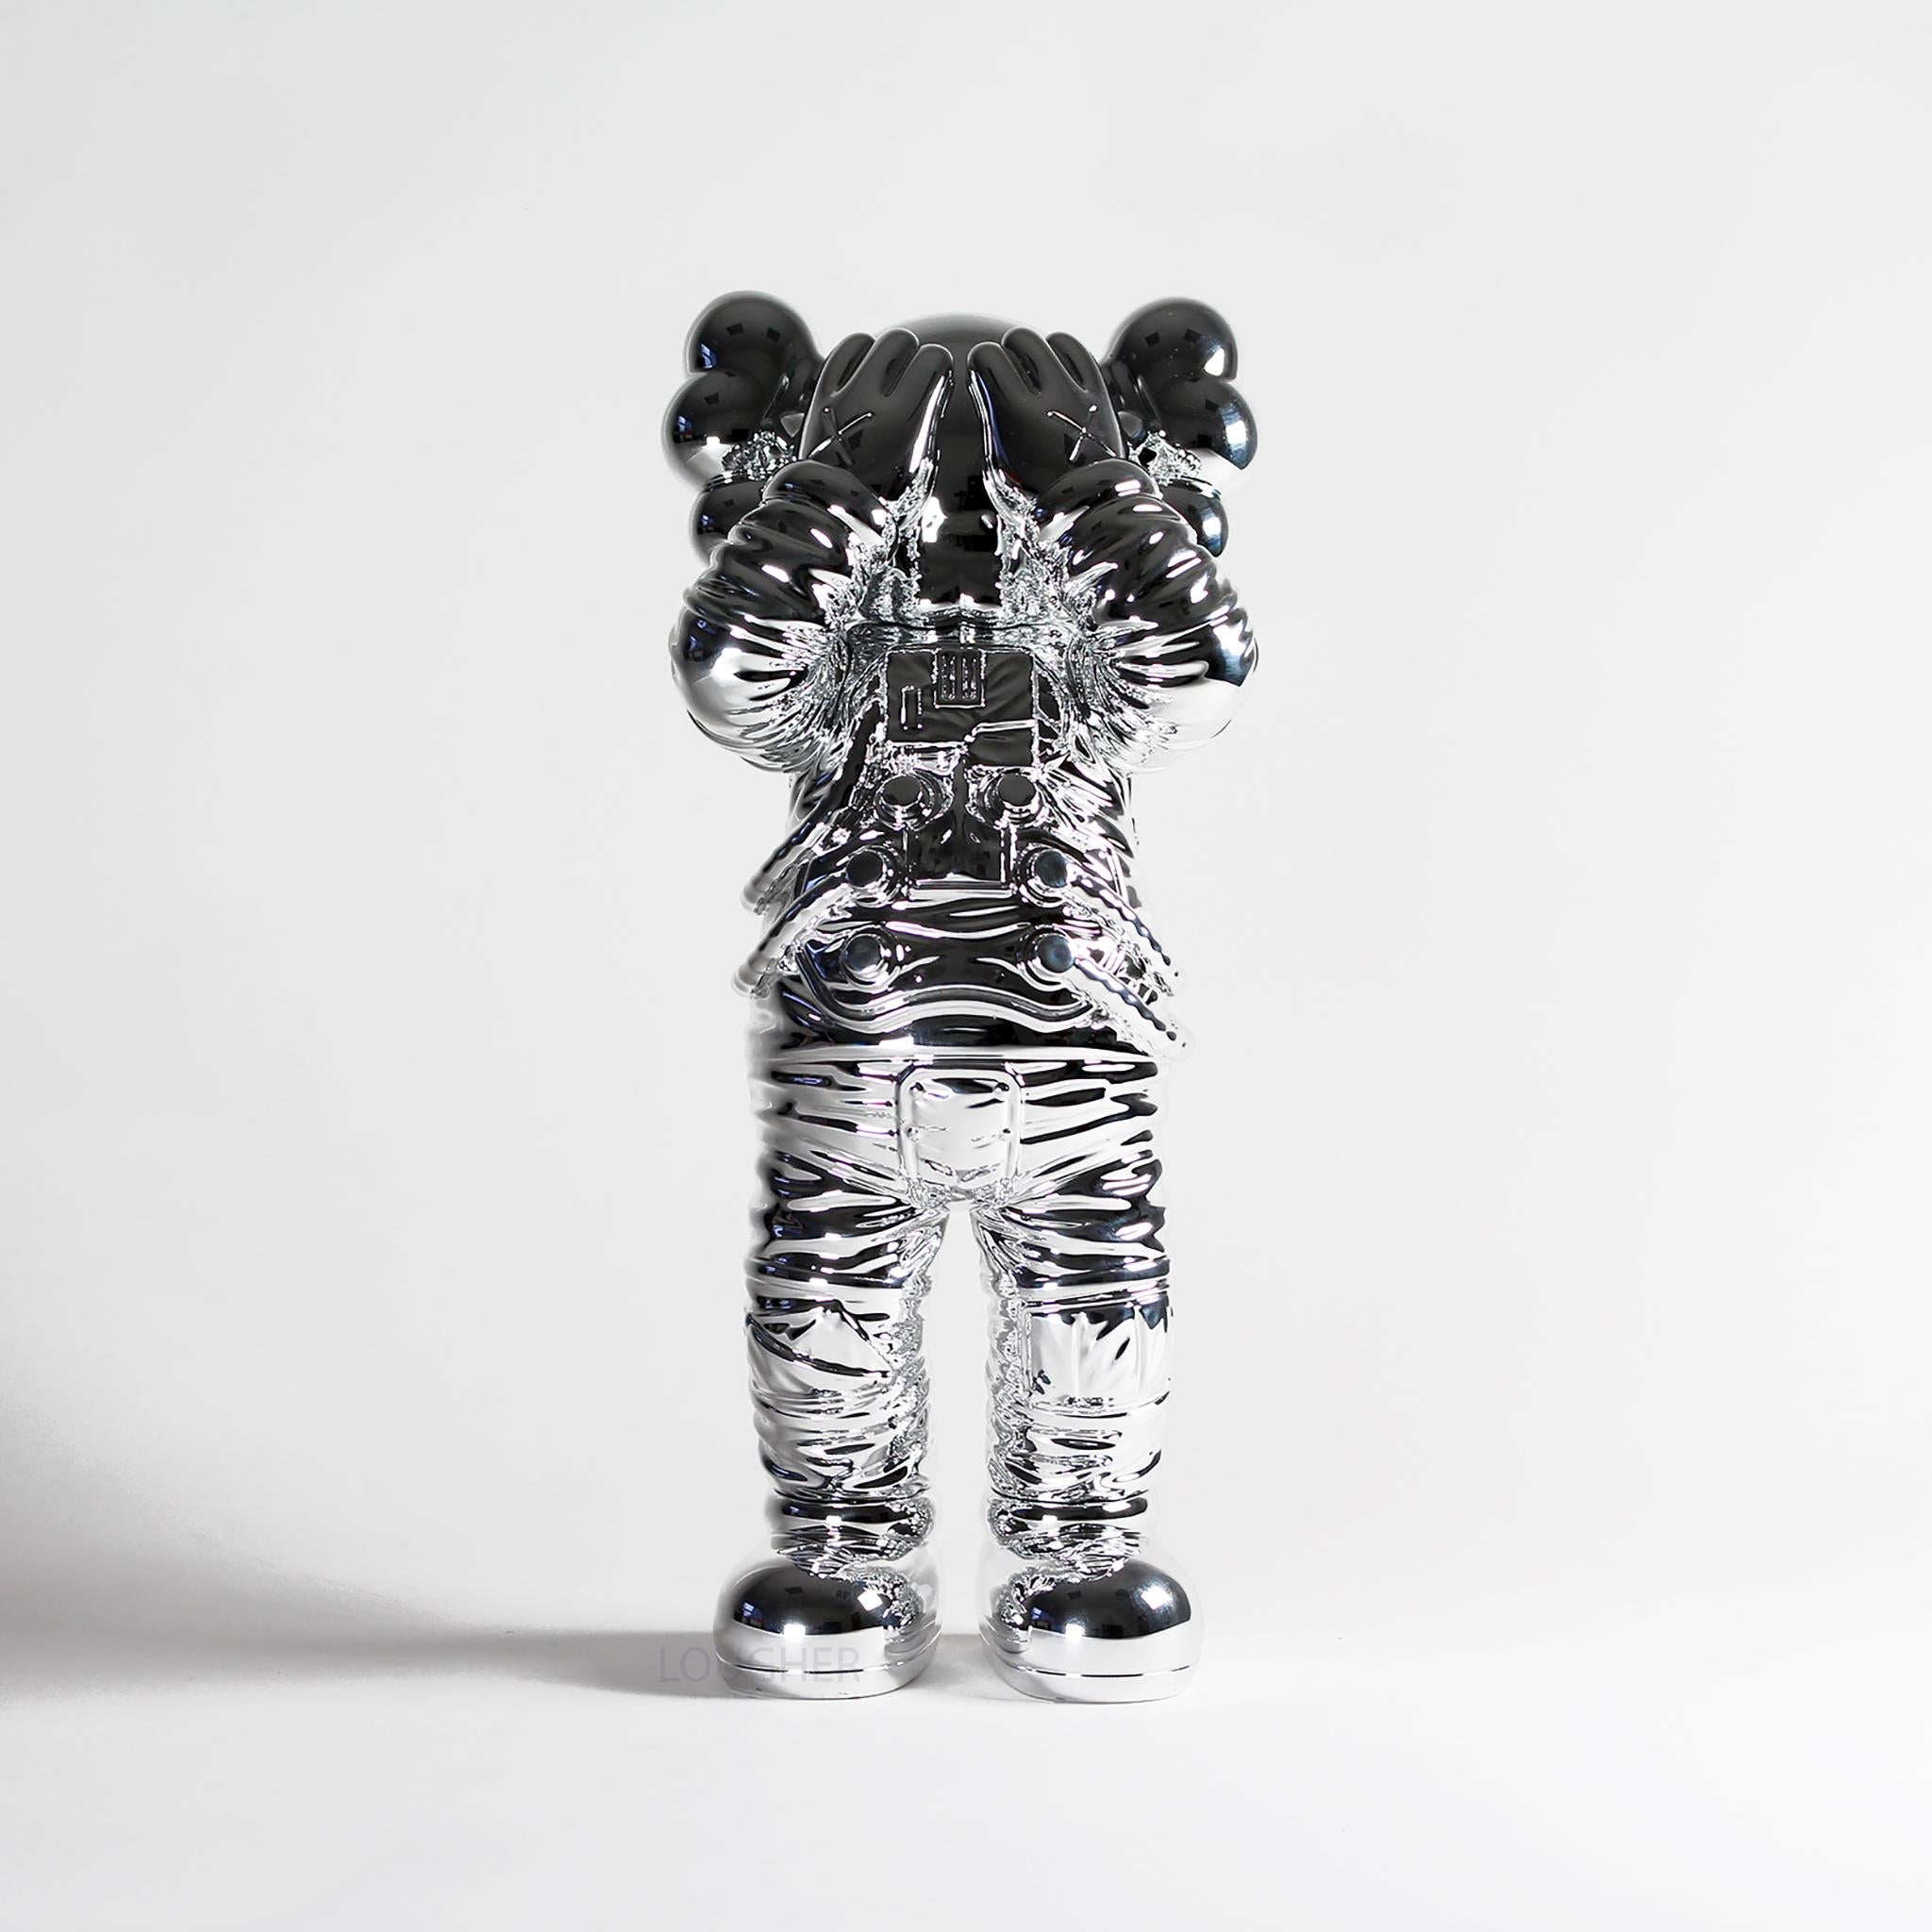 KAWS Figurative Sculpture - Holiday Space (Silver)